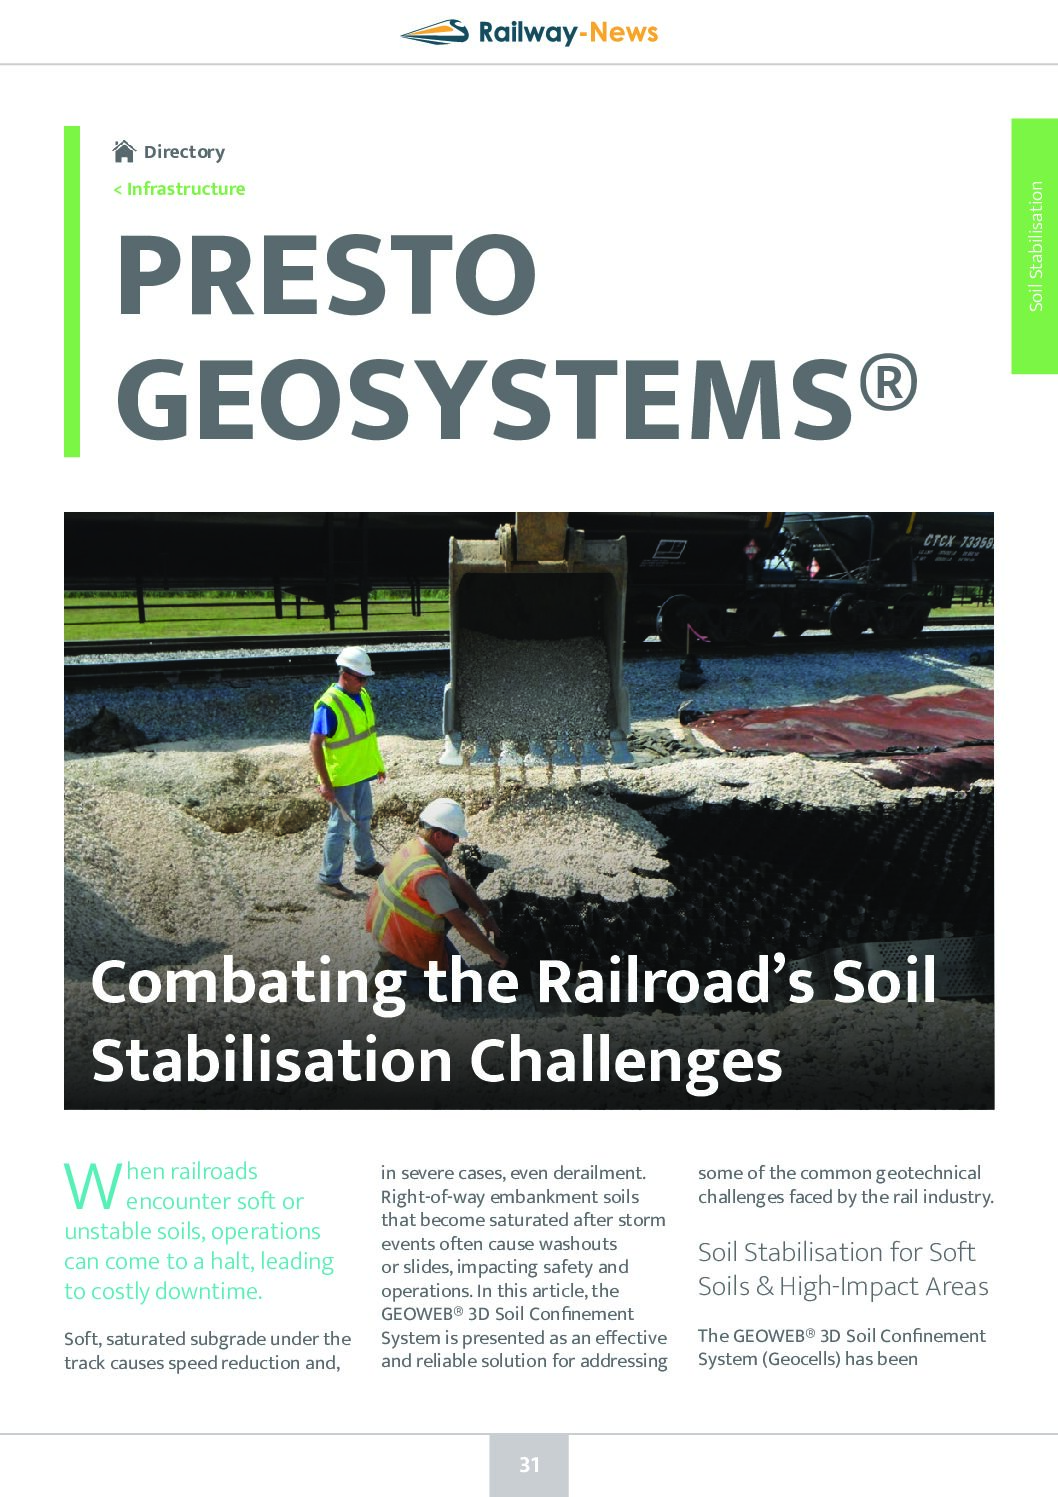 Combating the Railroad’s Soil Stabilisation Challenges